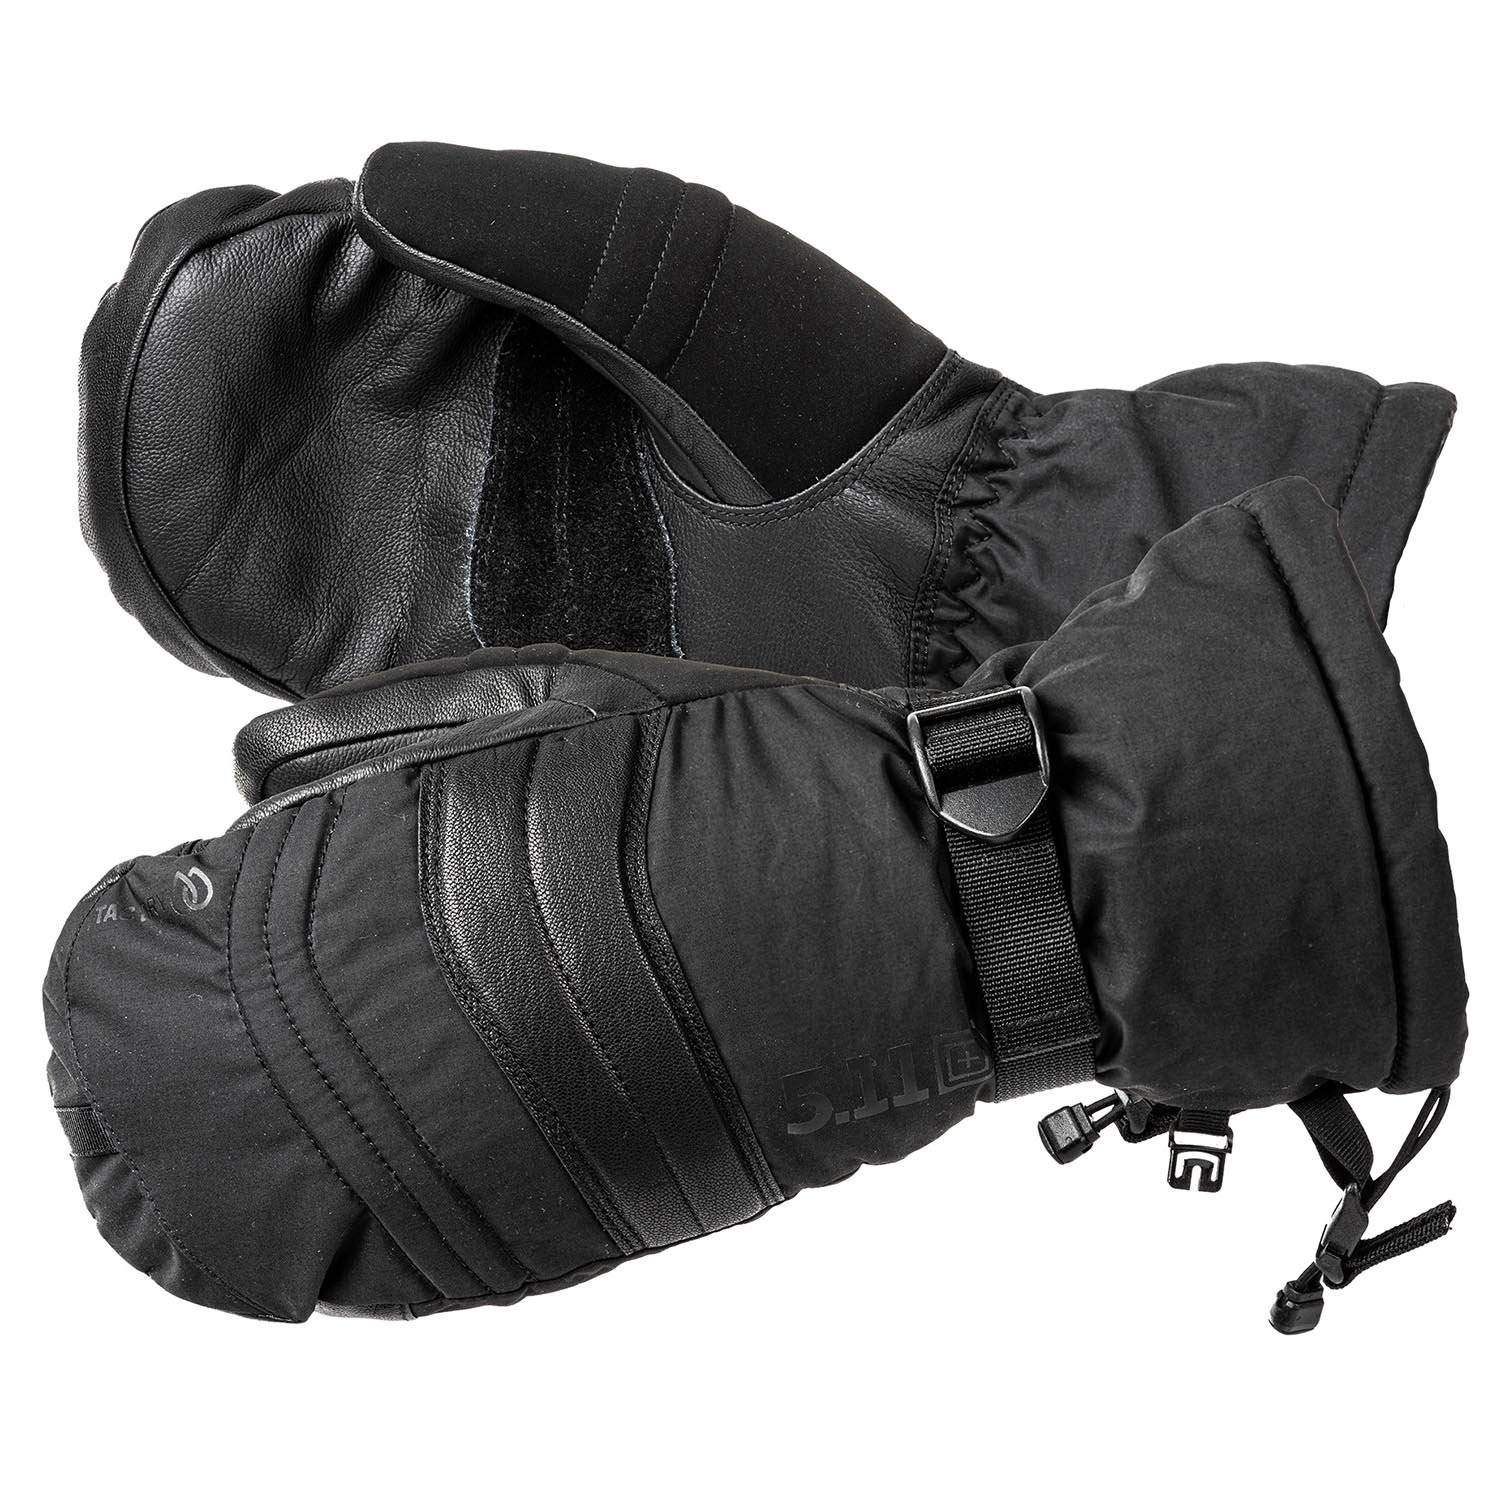 5.11 Tactical URSA 3-in-1 Primaloft Insulated Mitts